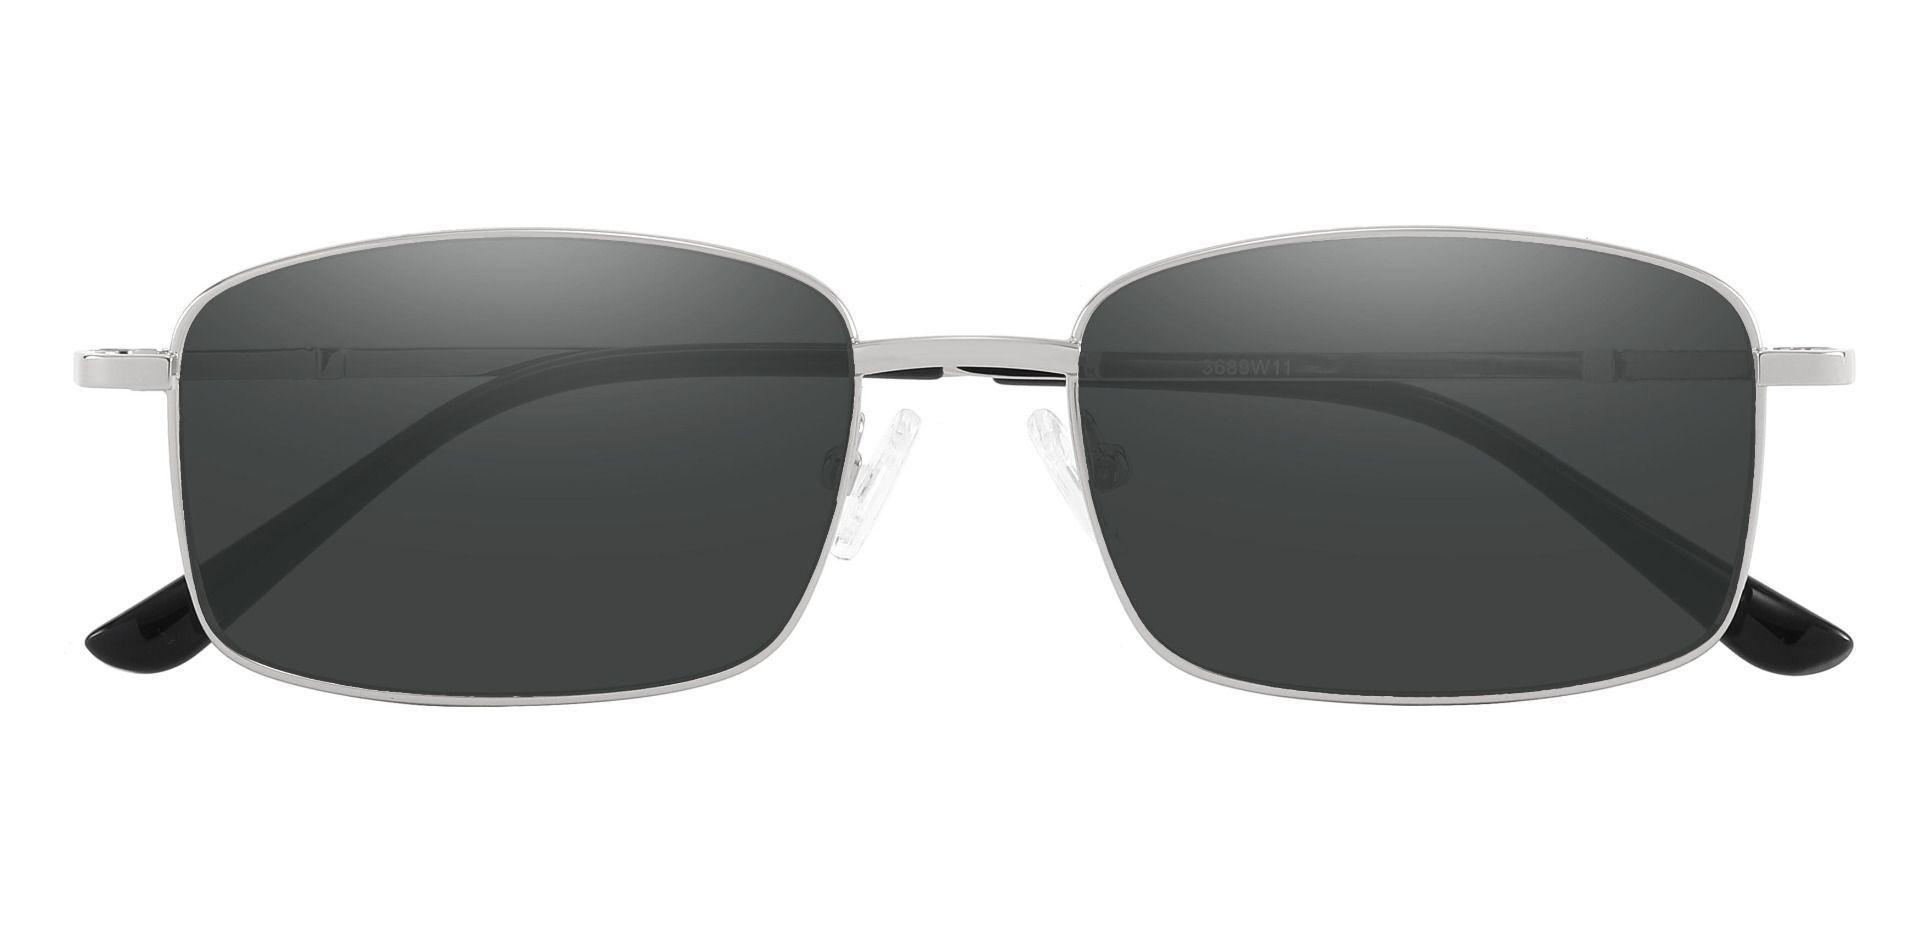 Clyde Rectangle Lined Bifocal Sunglasses - Silver Frame With Gray Lenses